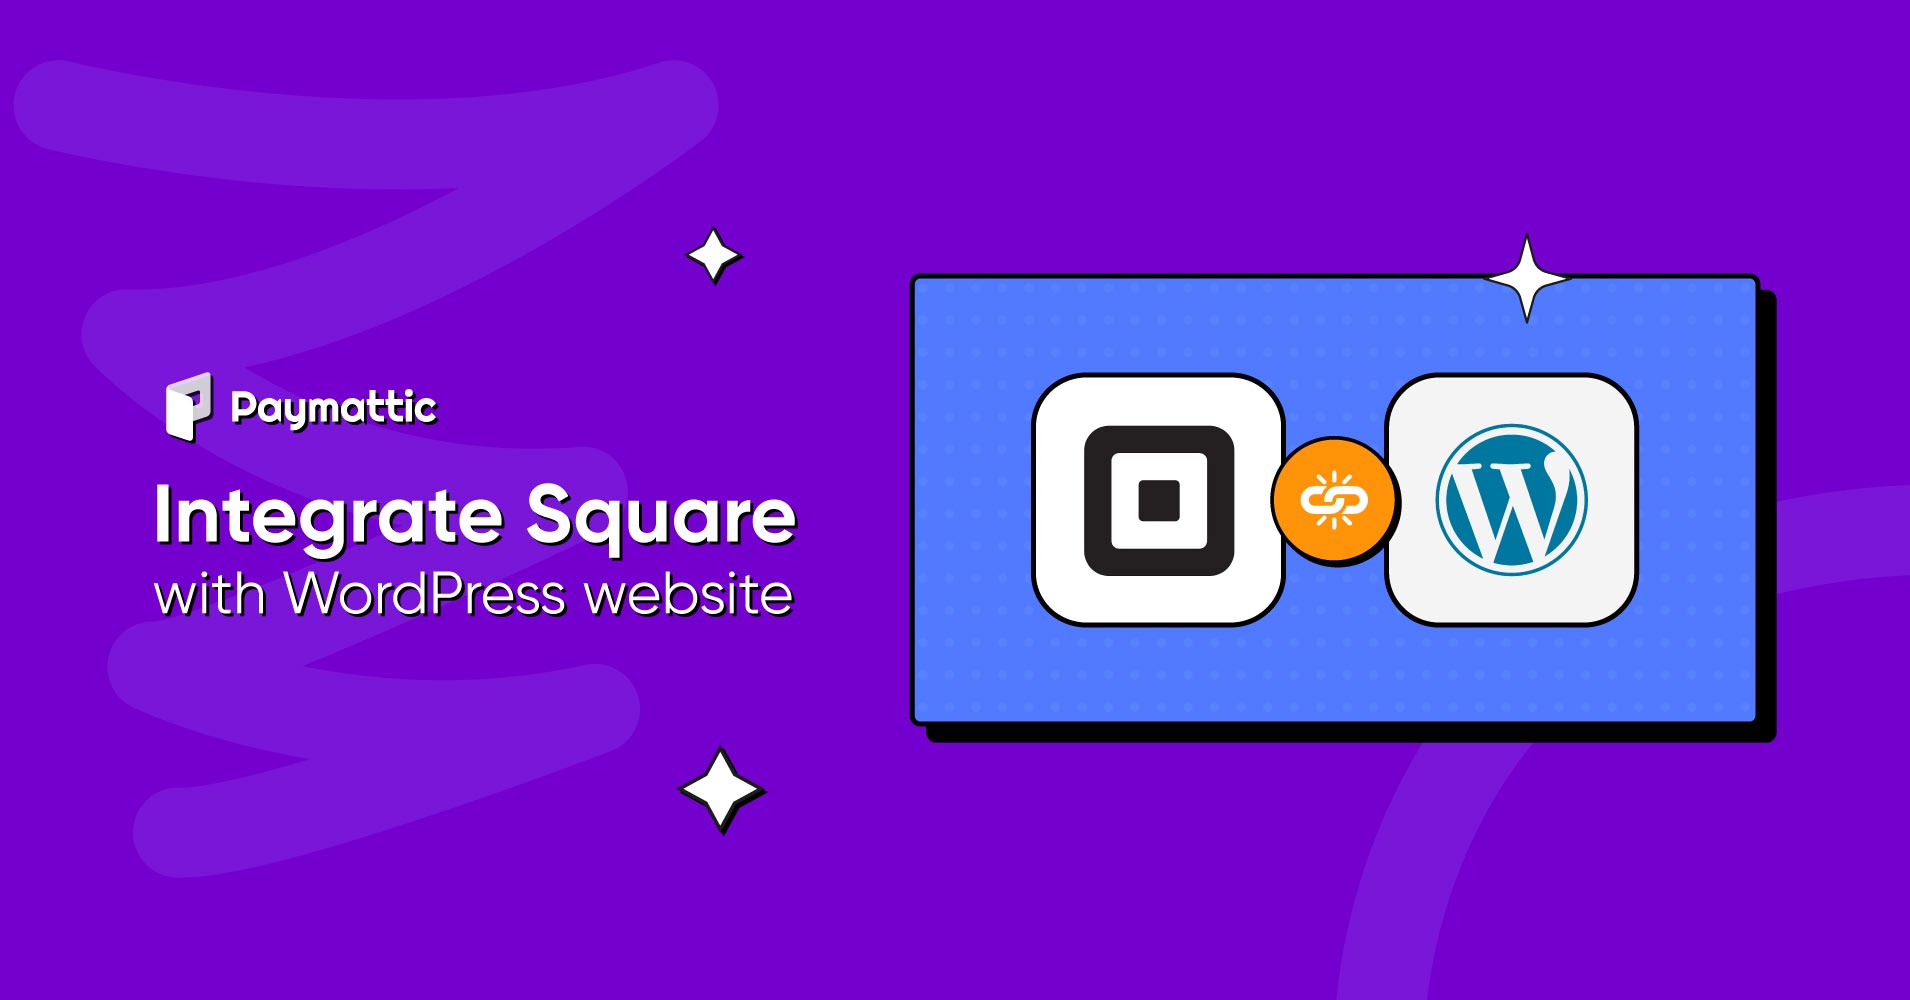 Square Payment | A Smart Solution For Your Online Business